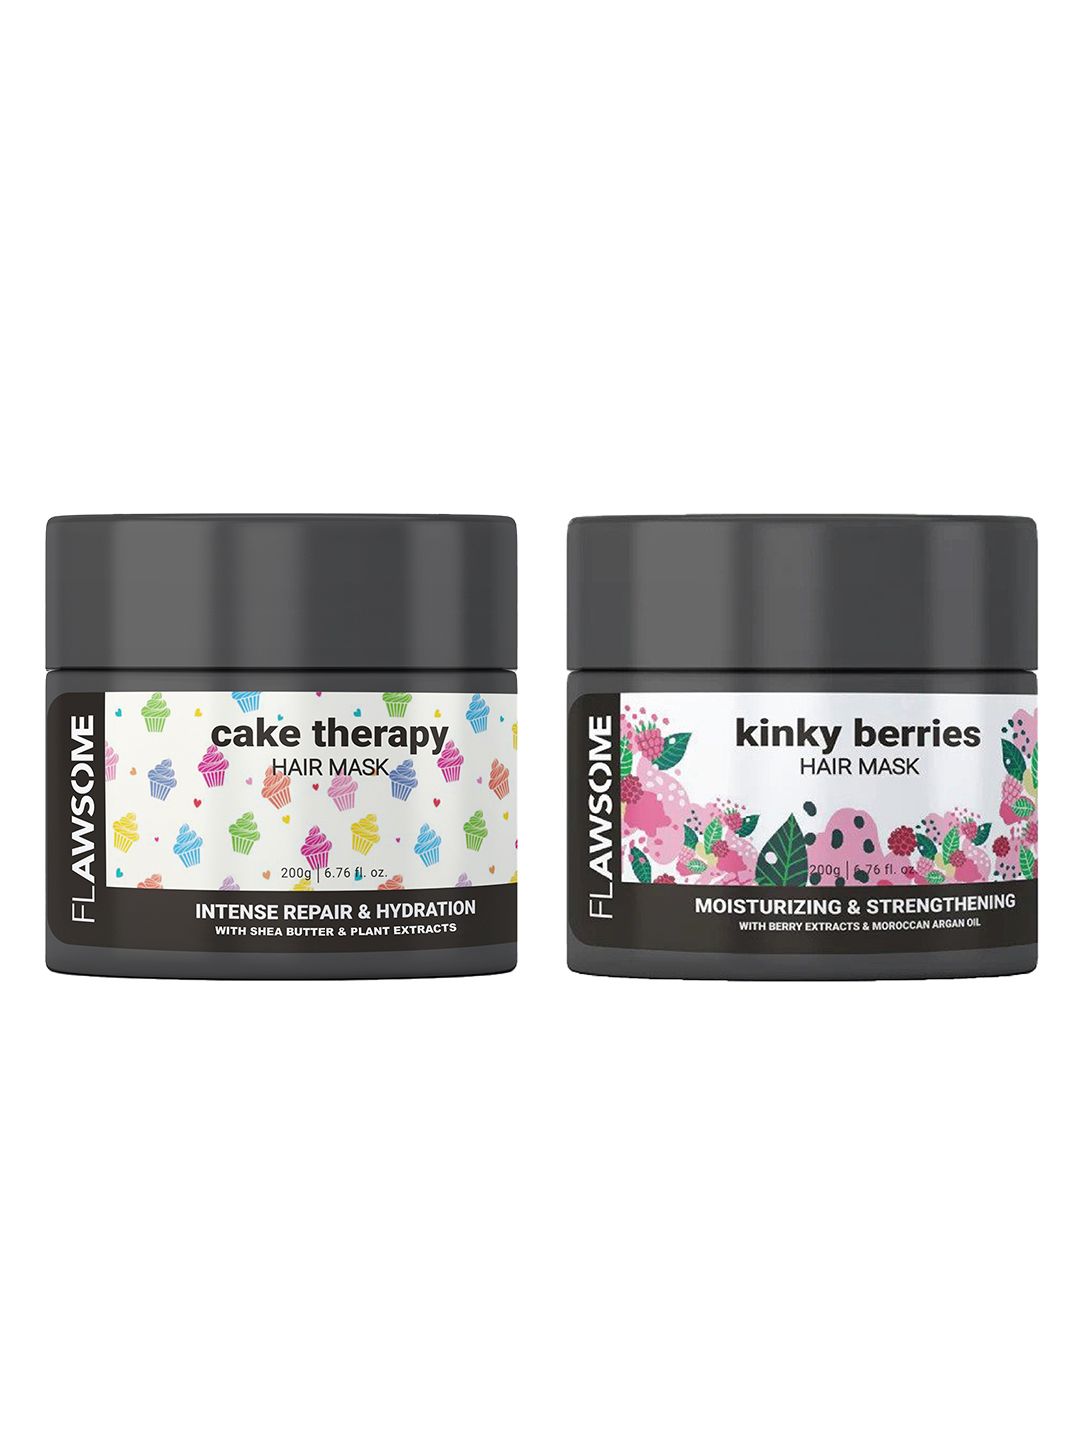 Flawsome Set of Cake Therapy & Kinky Berries Hair Masks - 200 g Each Price in India